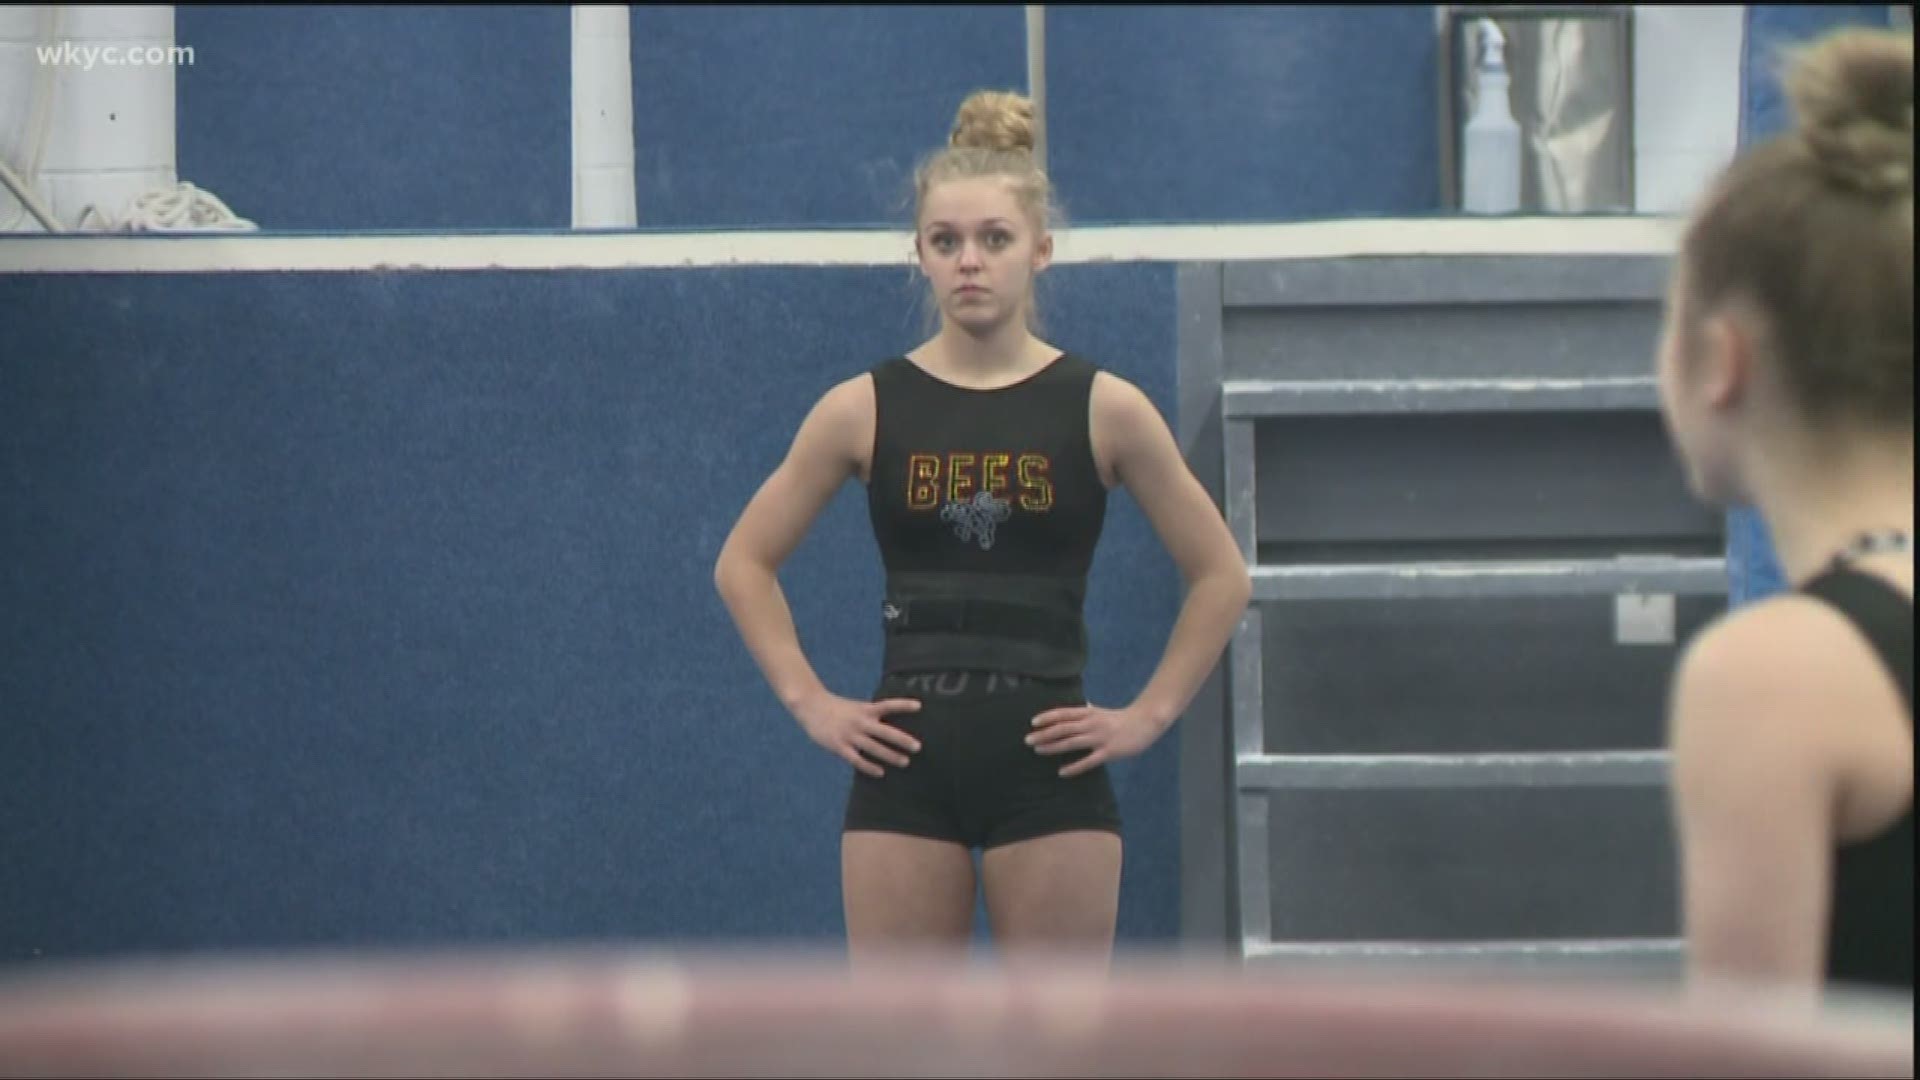 Go Bees! The Brecksville Broadview Heights gymnastics team will compete for a state title -- the school's 20th state championship.